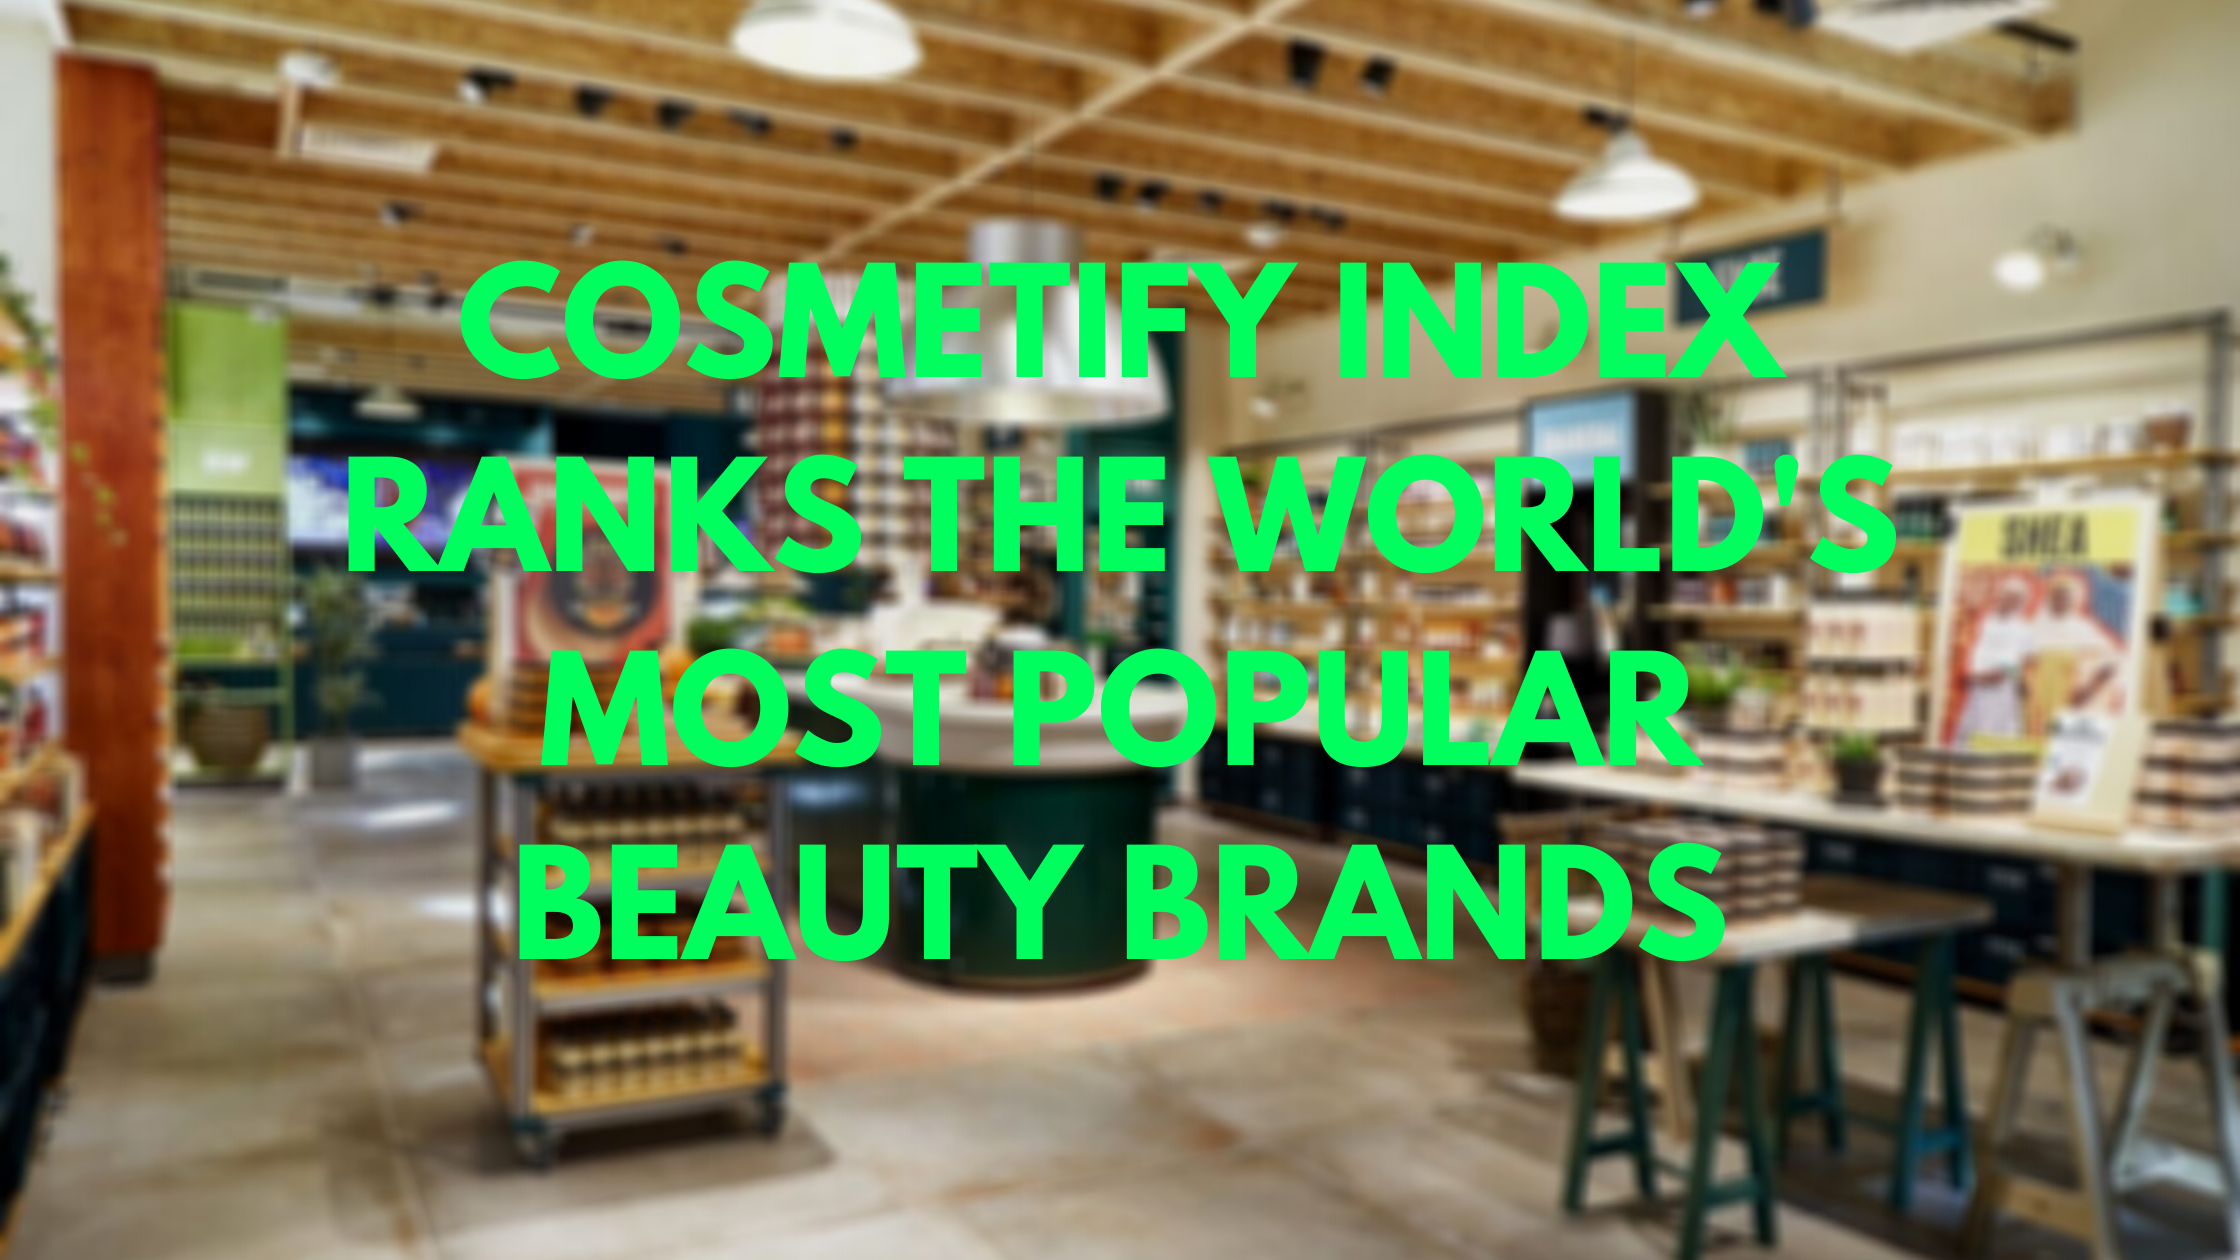 The World’s Most Popular Brands According to Cosmetify